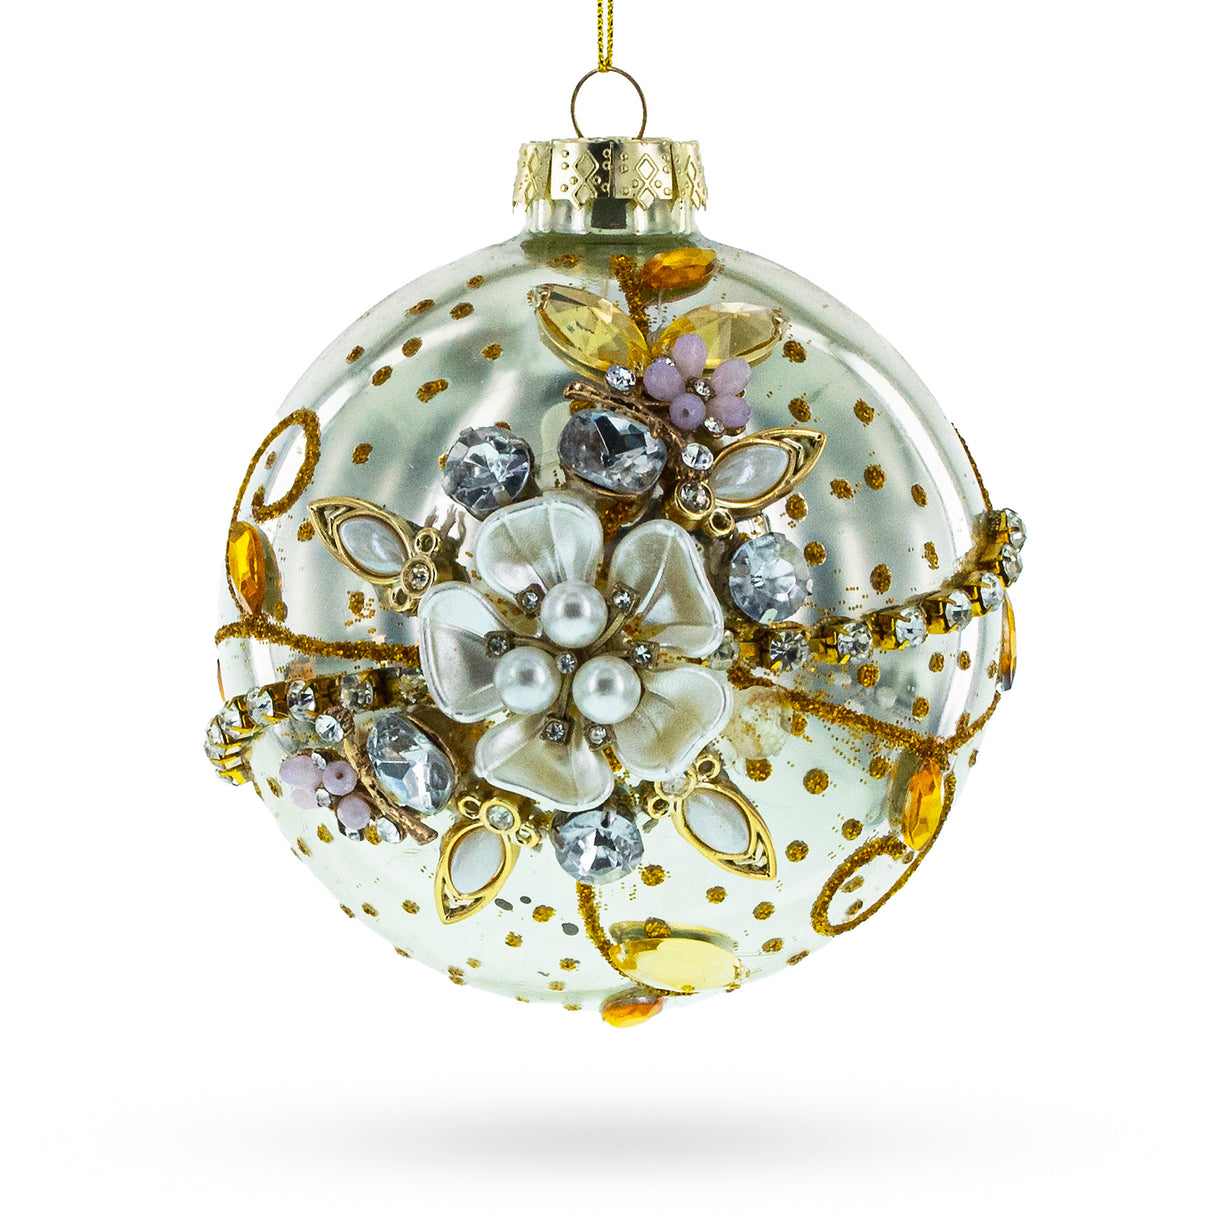 Glass Jeweled Flowers - Exquisite Blown Glass Ball Christmas Ornament in Silver color